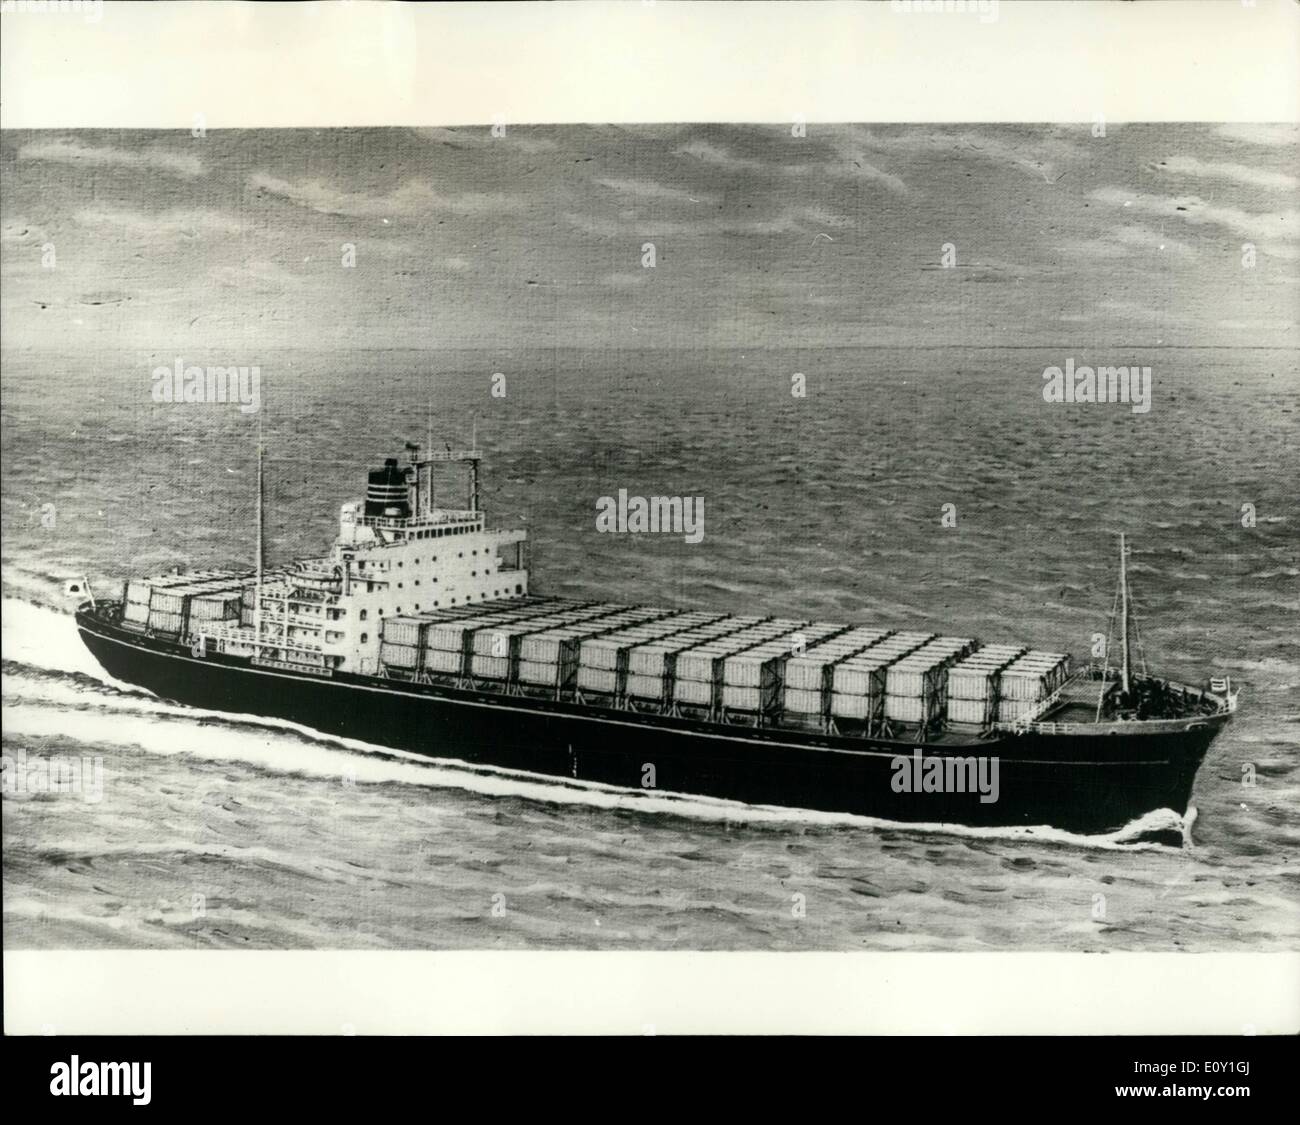 Mar. 03, 1968 - FIRST CONTAINER SHIP IN JAPAN: The keel of Japan's first lift-on, lift-off container ship was laid down in the Kobe shipyard of Mitsubishi Heavy Industries, recently. 175 metres long, and 26 meters wide, the ship will have a gross tonnage of about 16,900 tons and cargo capacity of about 15,800 tons, and will be completed by the end of August this year. Photo Shows:- An artist's concept of Japan's first lift-on, lift-off container ship, which will be completed by the end of August. Stock Photo